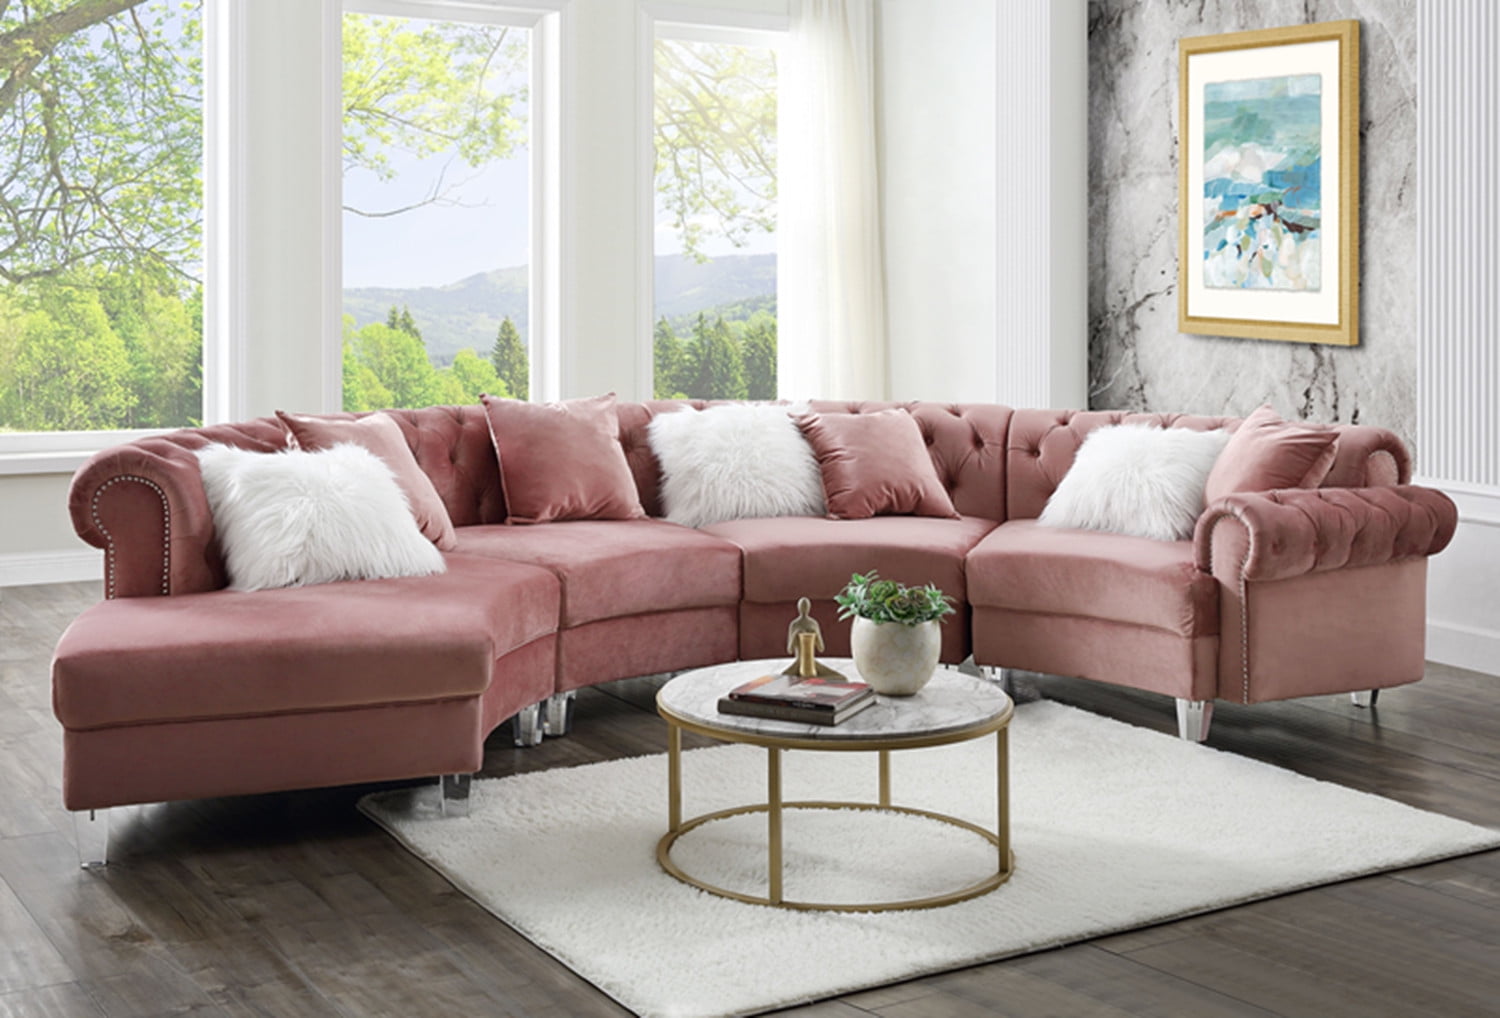 Reclining Sectional Sofa With 7 Pillows